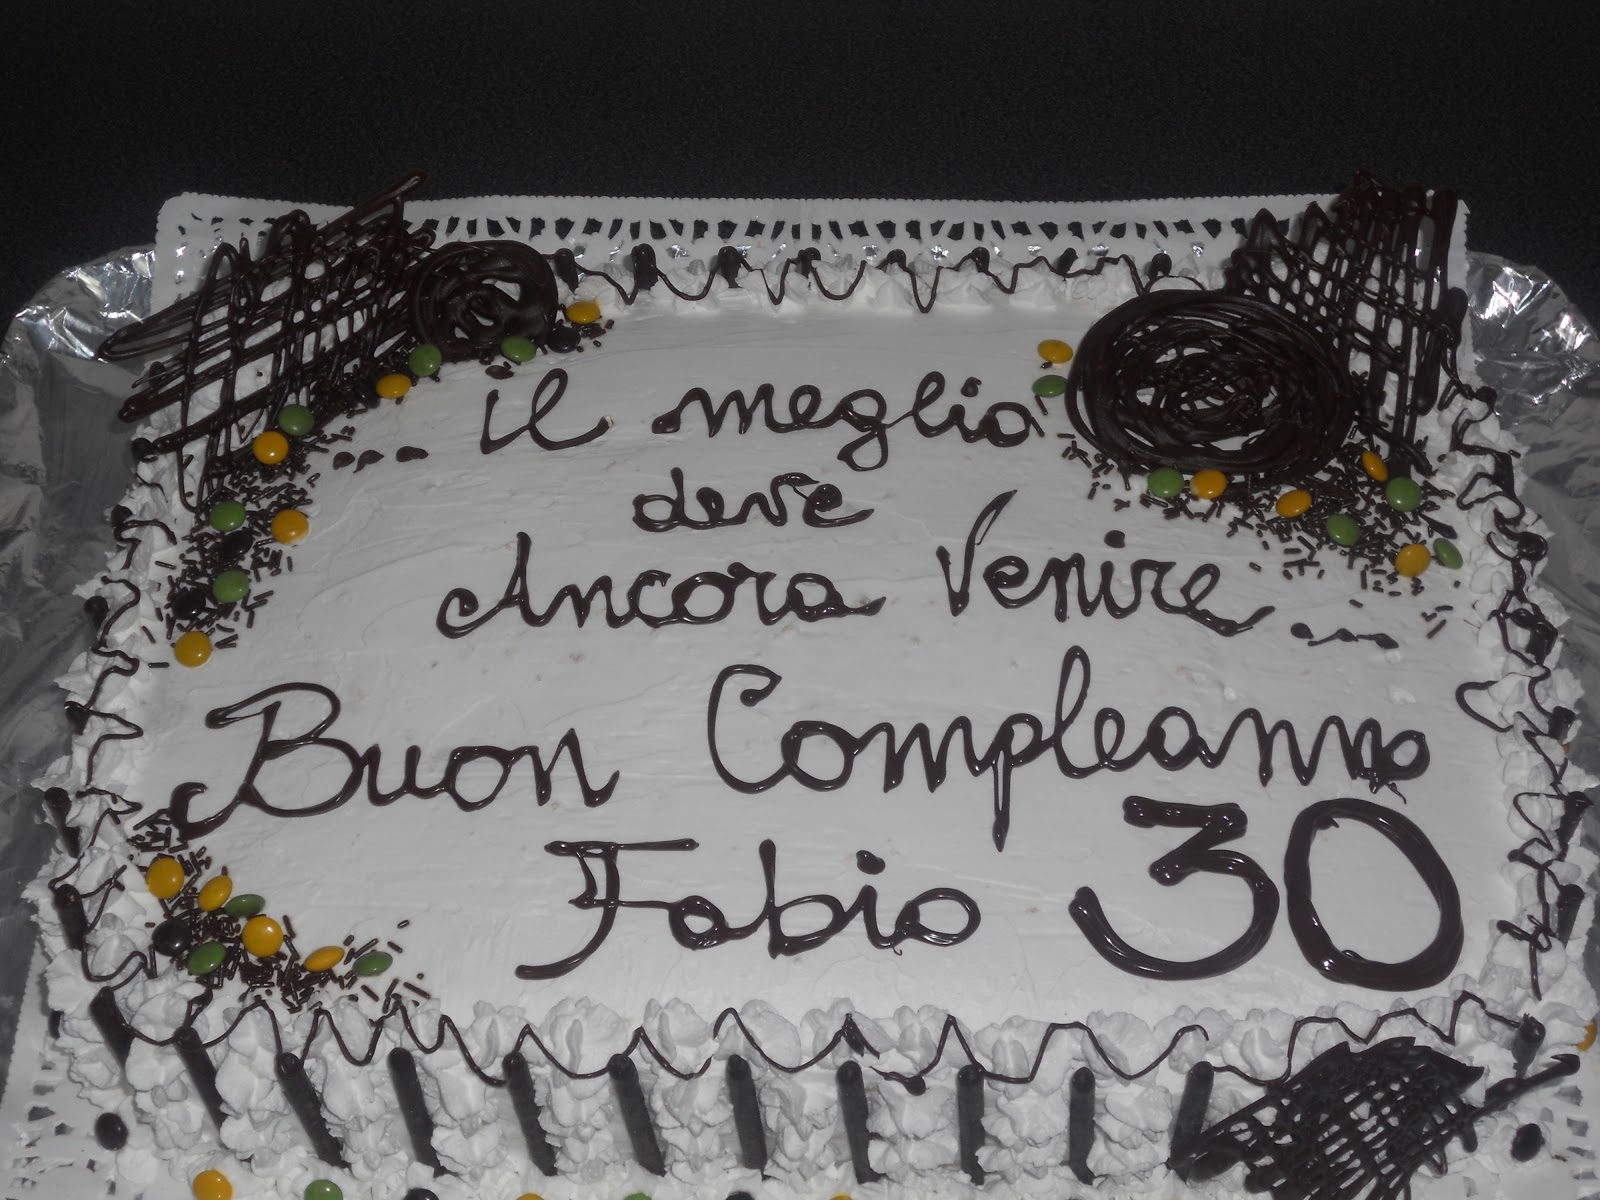 frase per compleanni